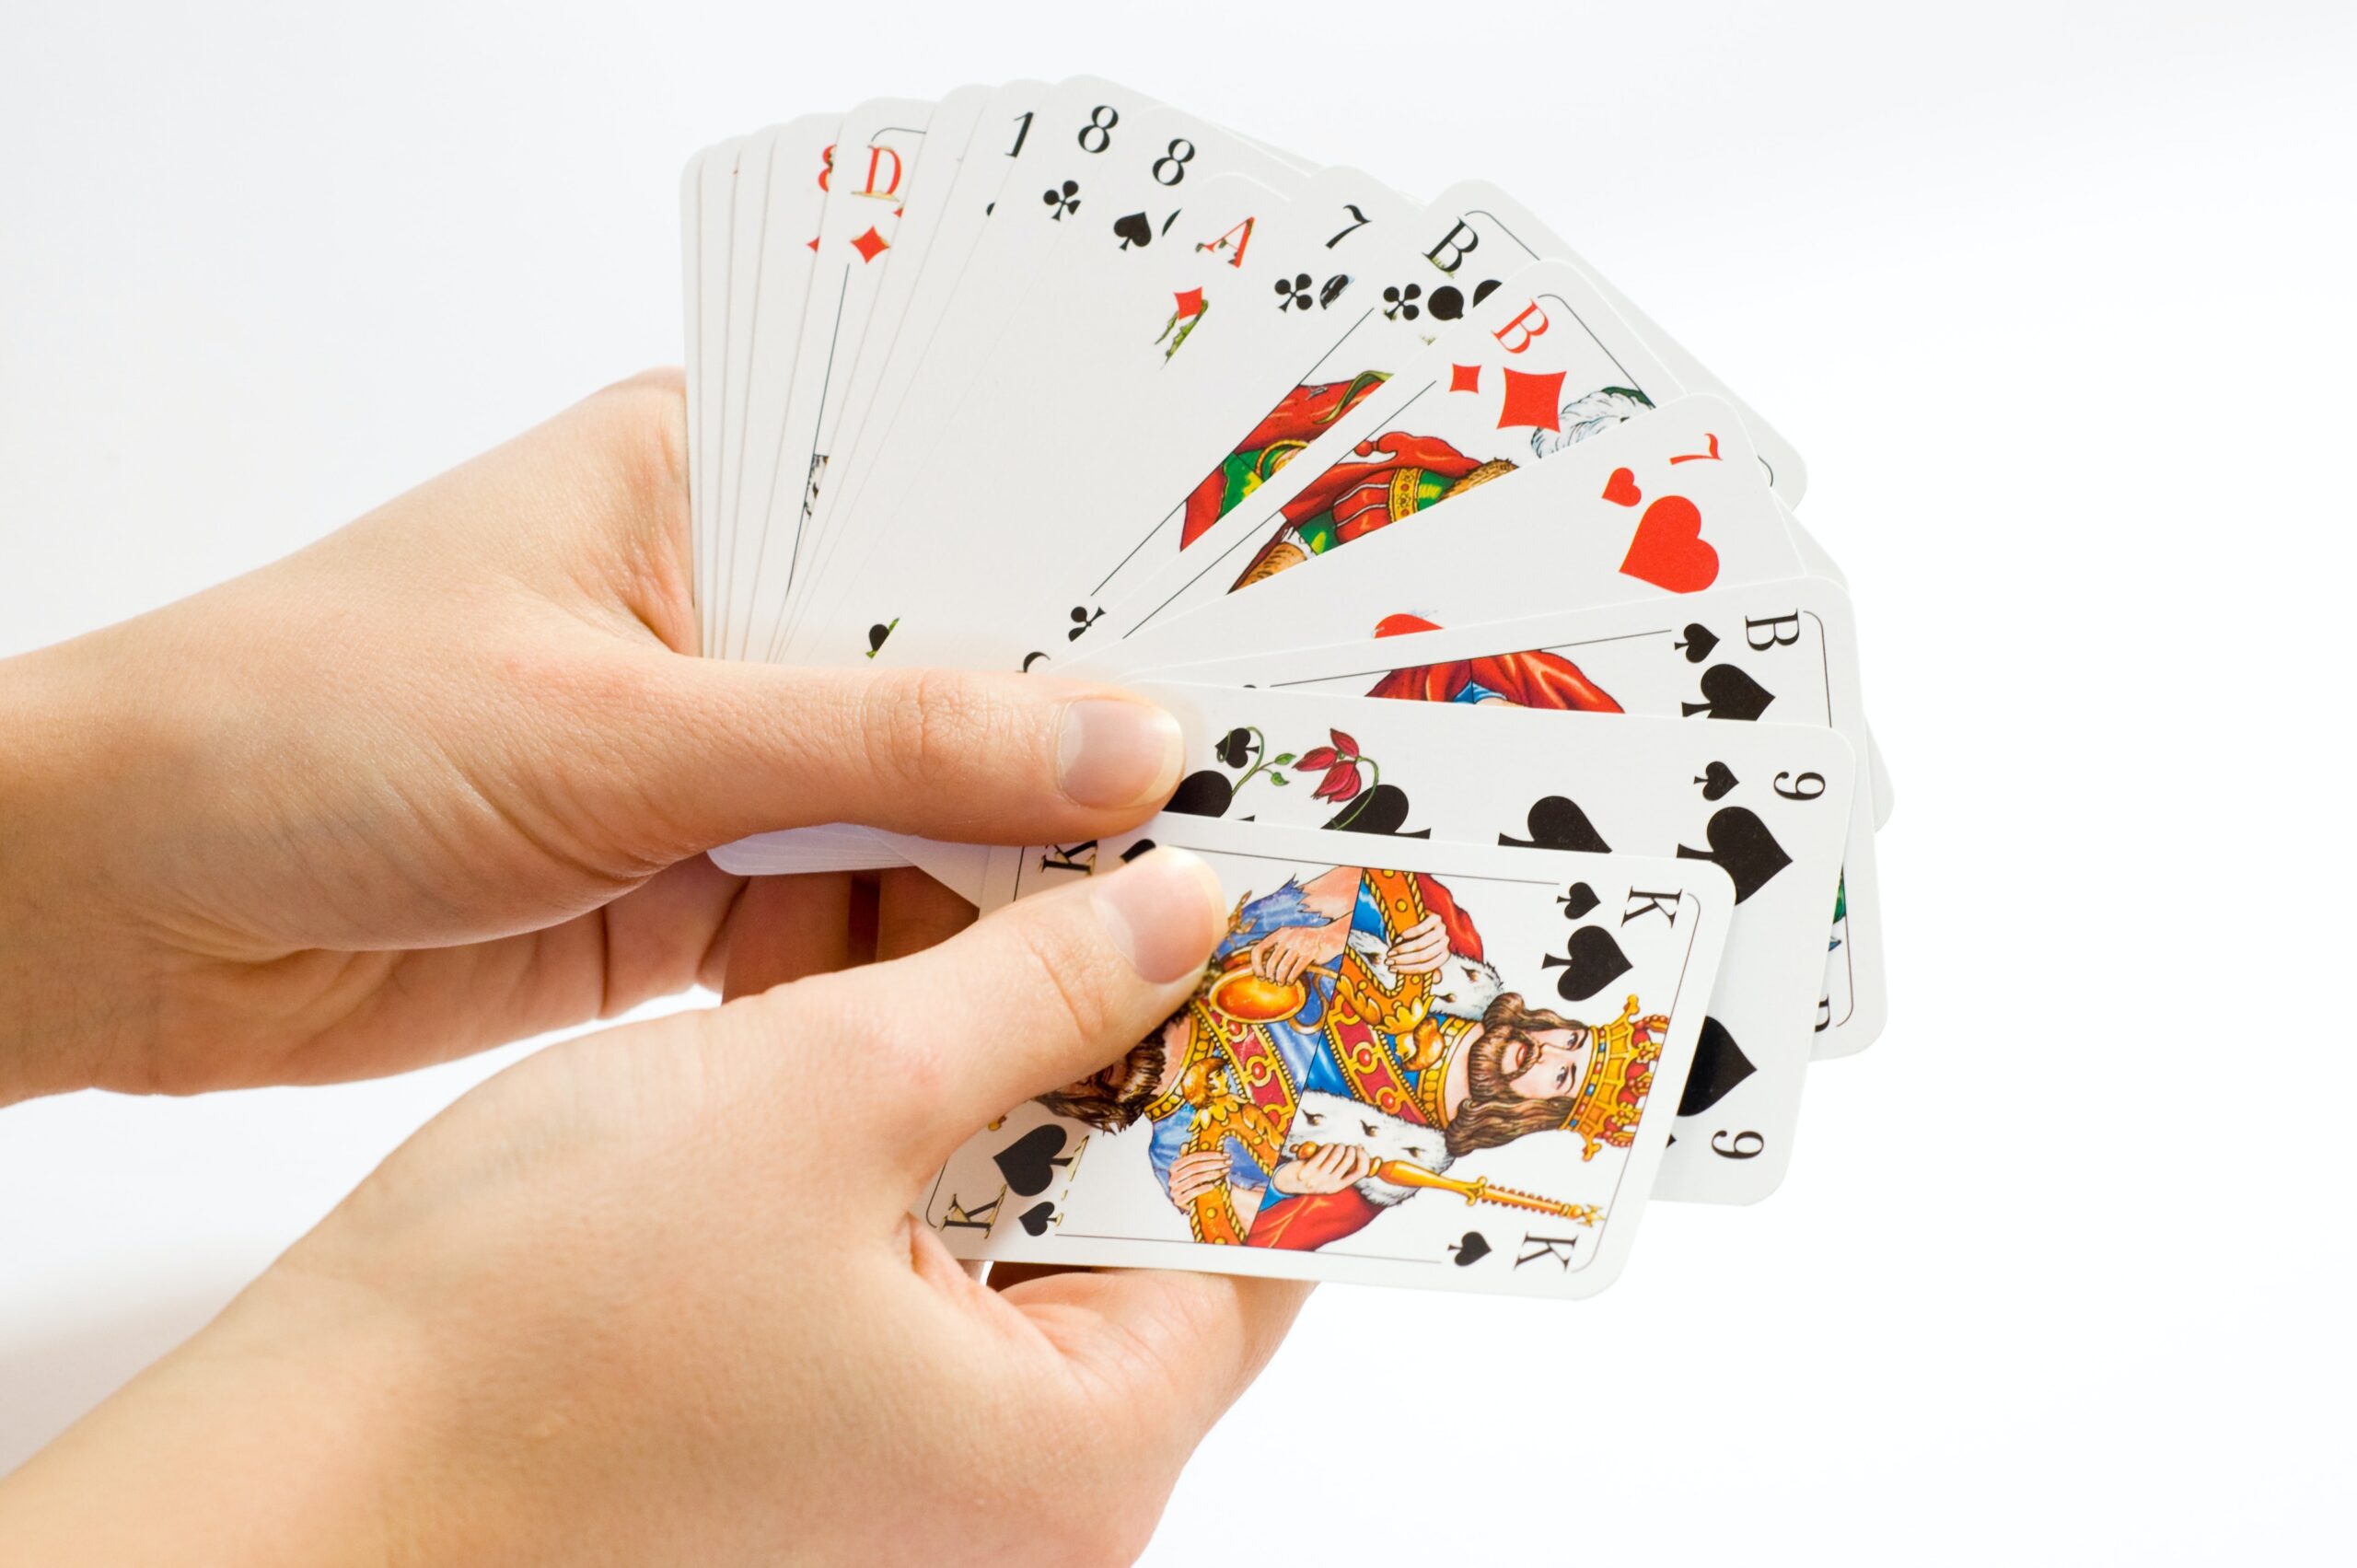 Identities and Fashions. What Can Playing Cards Reveal About Us? - Great Bridge Links